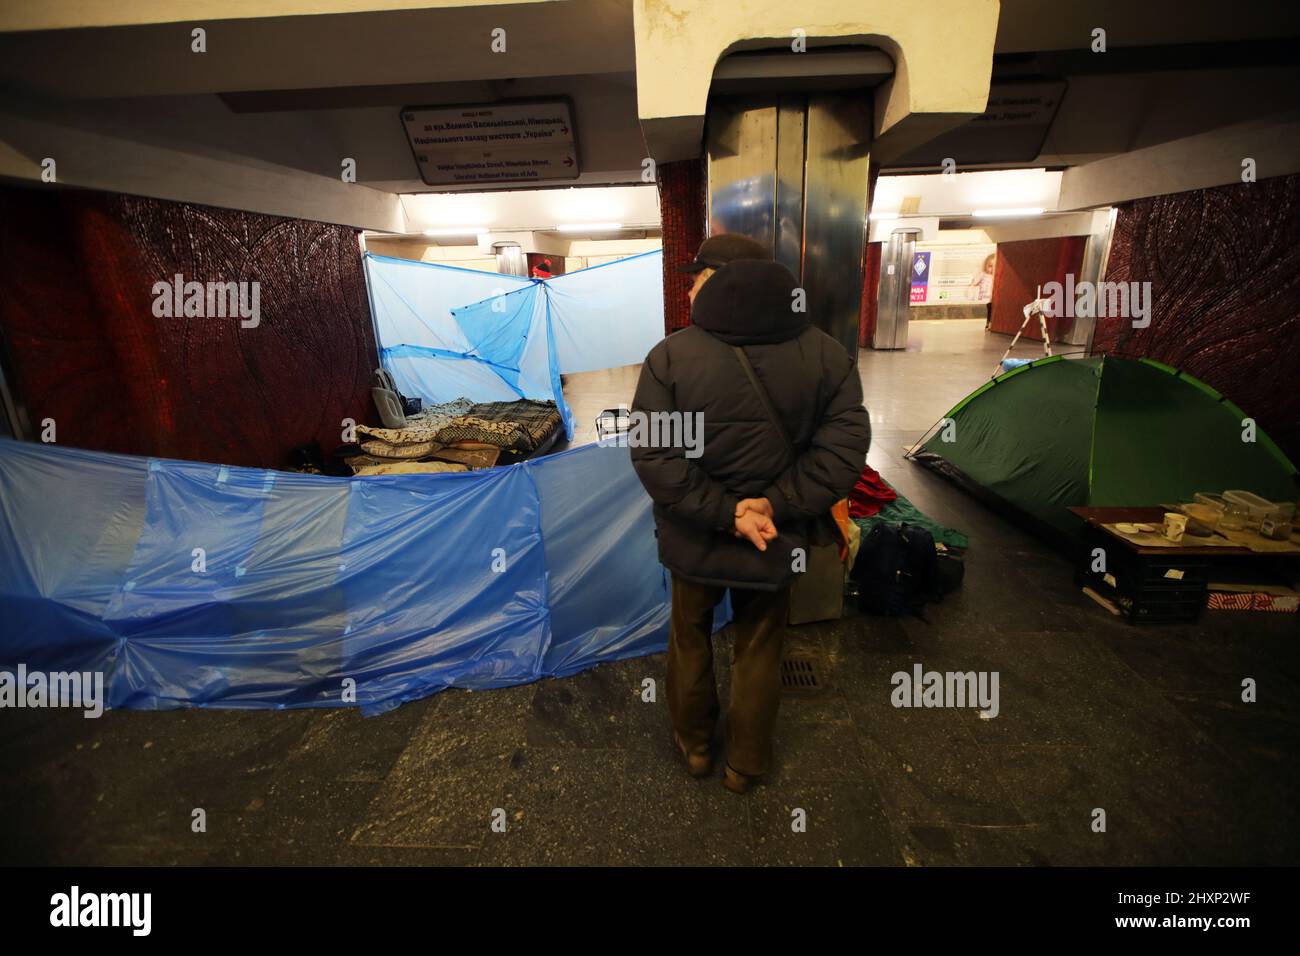 Non Exclusive: KYIV, UKRAINE - MARCH 13, 2022 - A man looks at a sleeping place equipped by the citizens on one of the metropolitan subway stations, w Stock Photo